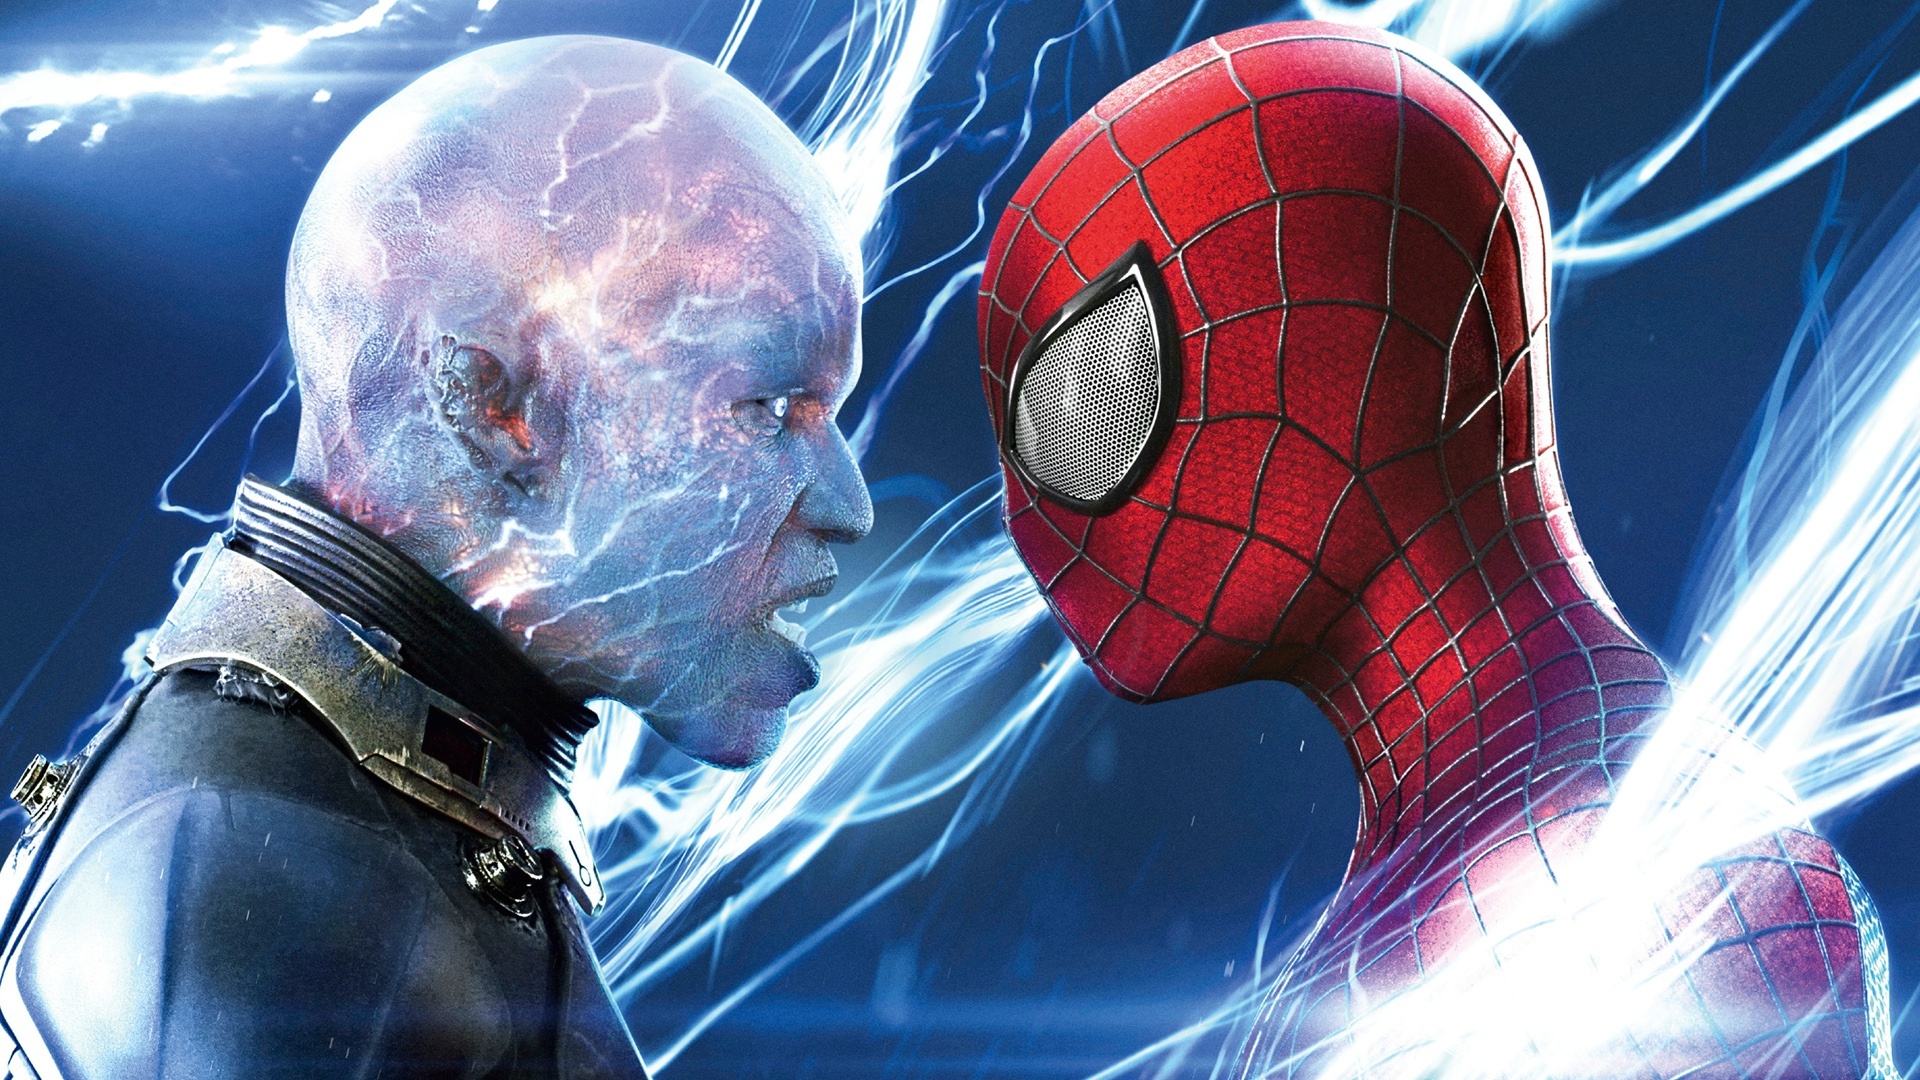 THE AMAZING SPIDER-MAN 2 HAS EARNED OVER $132 MILLION OVERSEAS SO FAR |  Cinescape Box Office